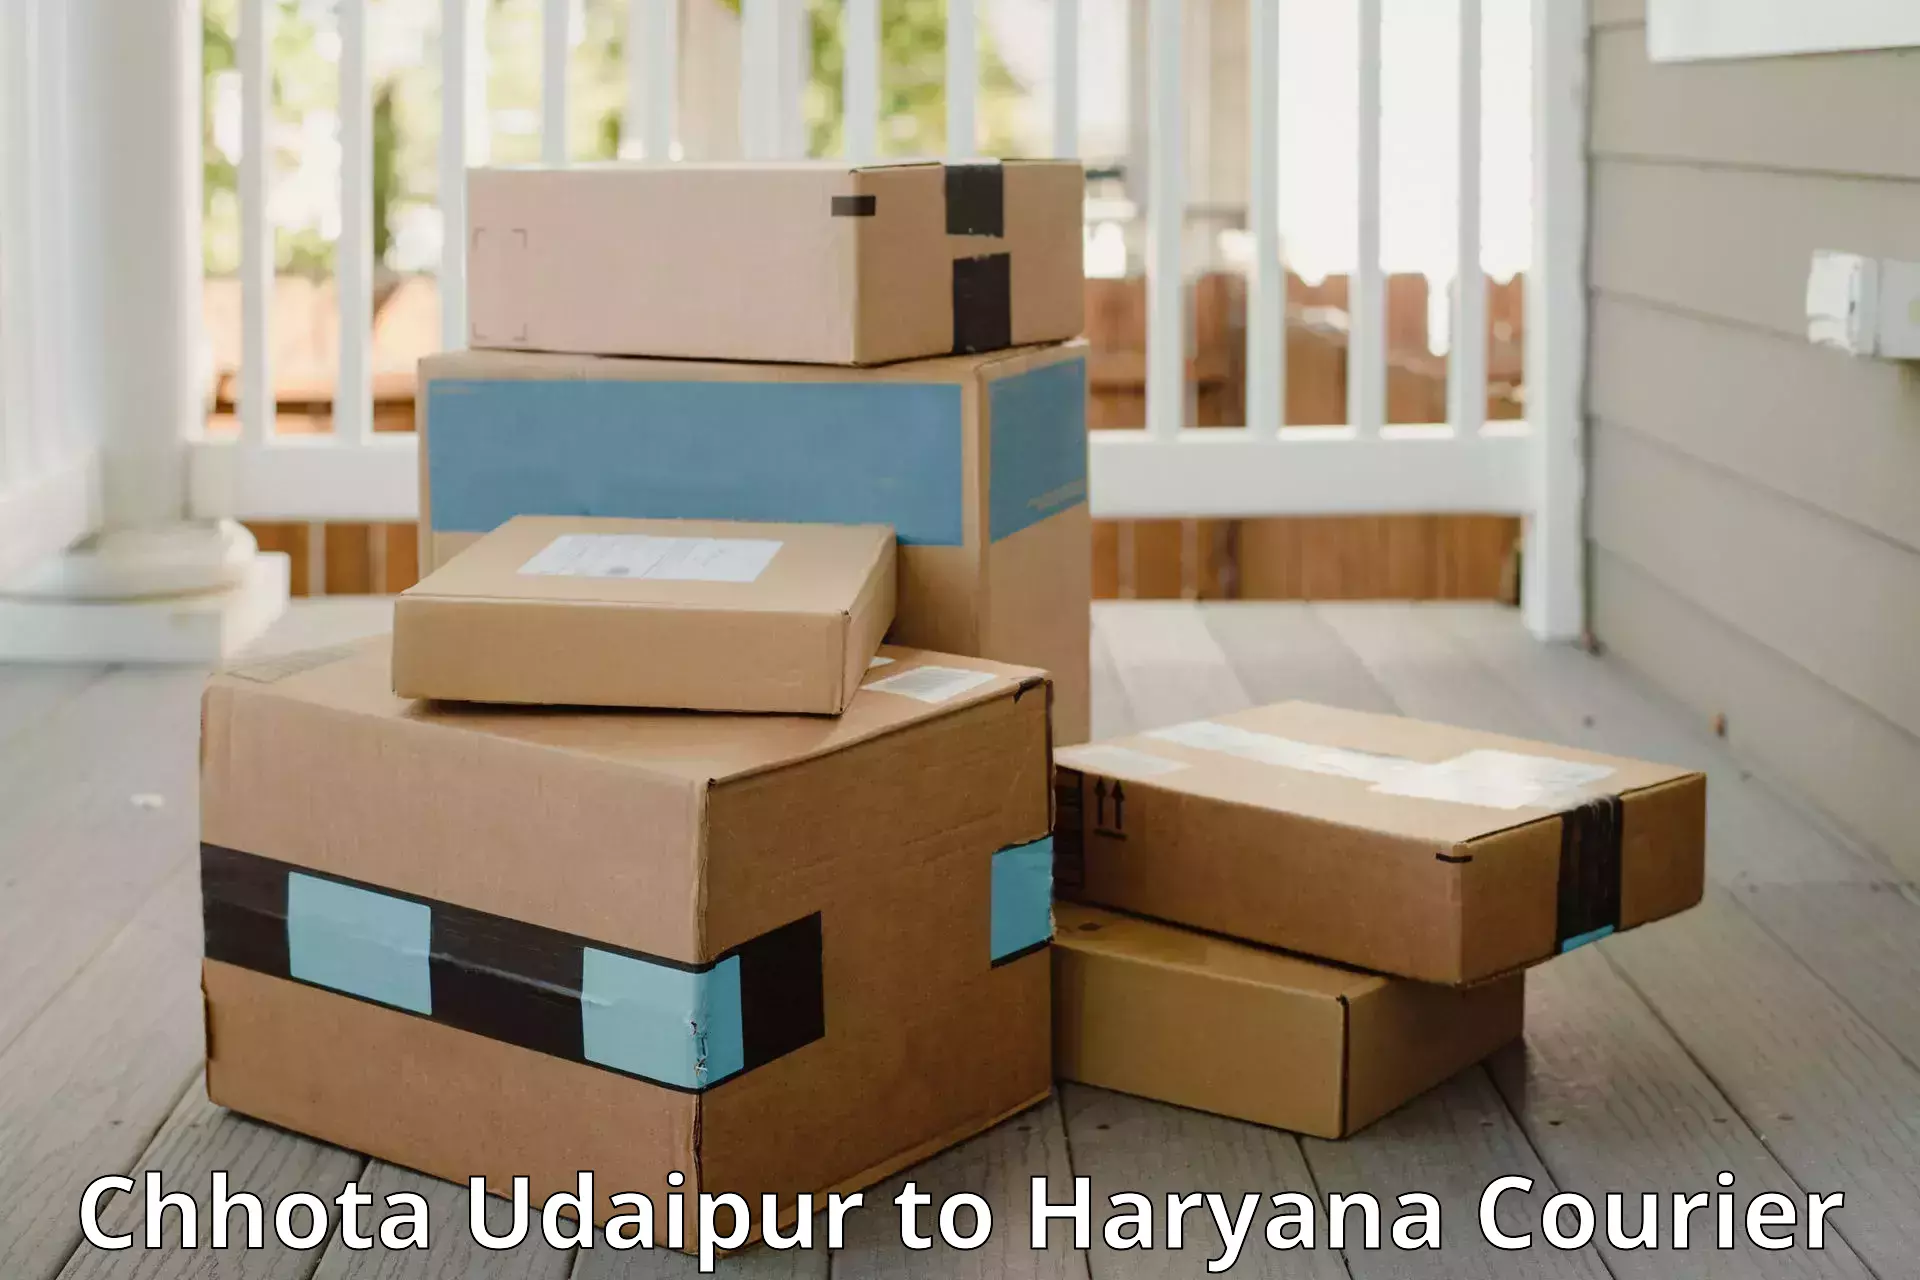 Baggage transport technology in Chhota Udaipur to Gurgaon